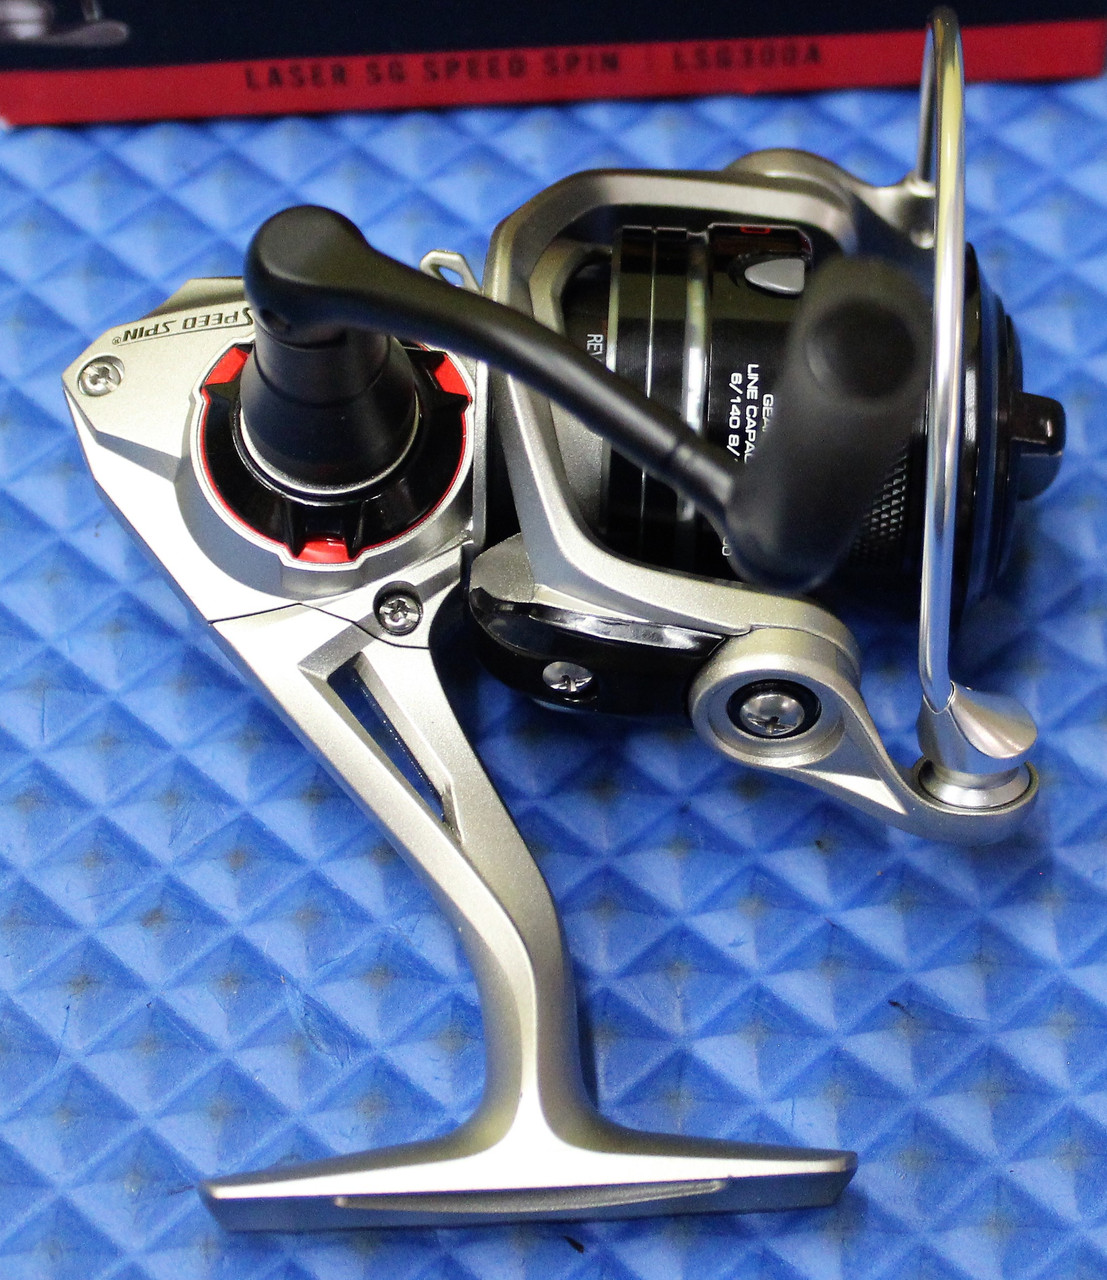 Lew's Laser SG Speed Spin Spinning Fishing Reel, Size 400 Reel, Silver 